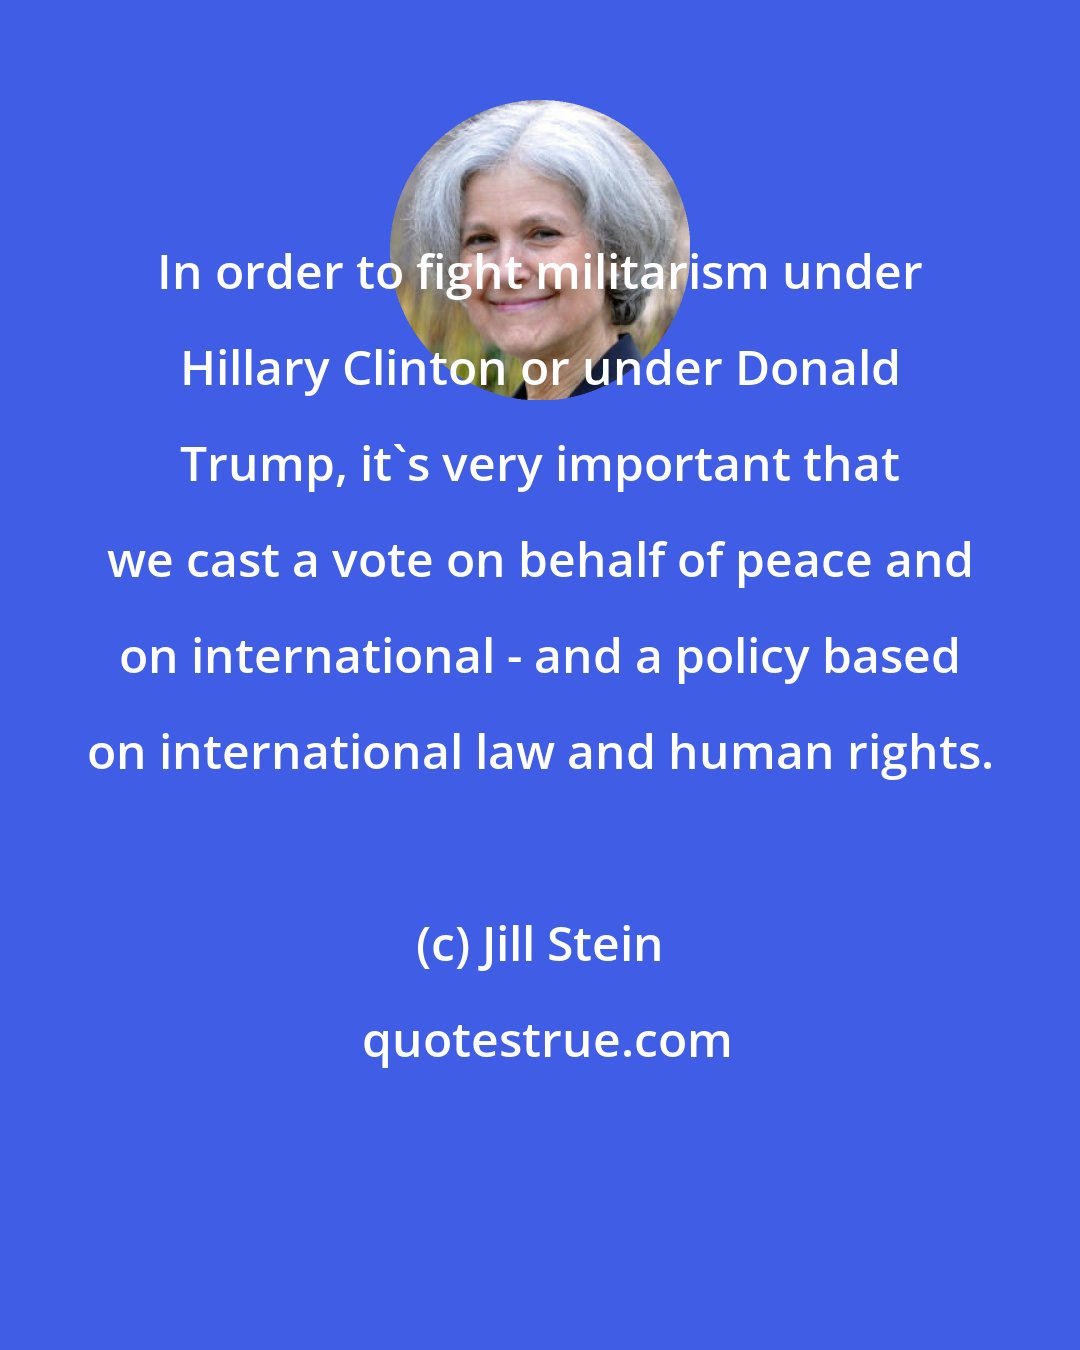 Jill Stein: In order to fight militarism under Hillary Clinton or under Donald Trump, it's very important that we cast a vote on behalf of peace and on international - and a policy based on international law and human rights.